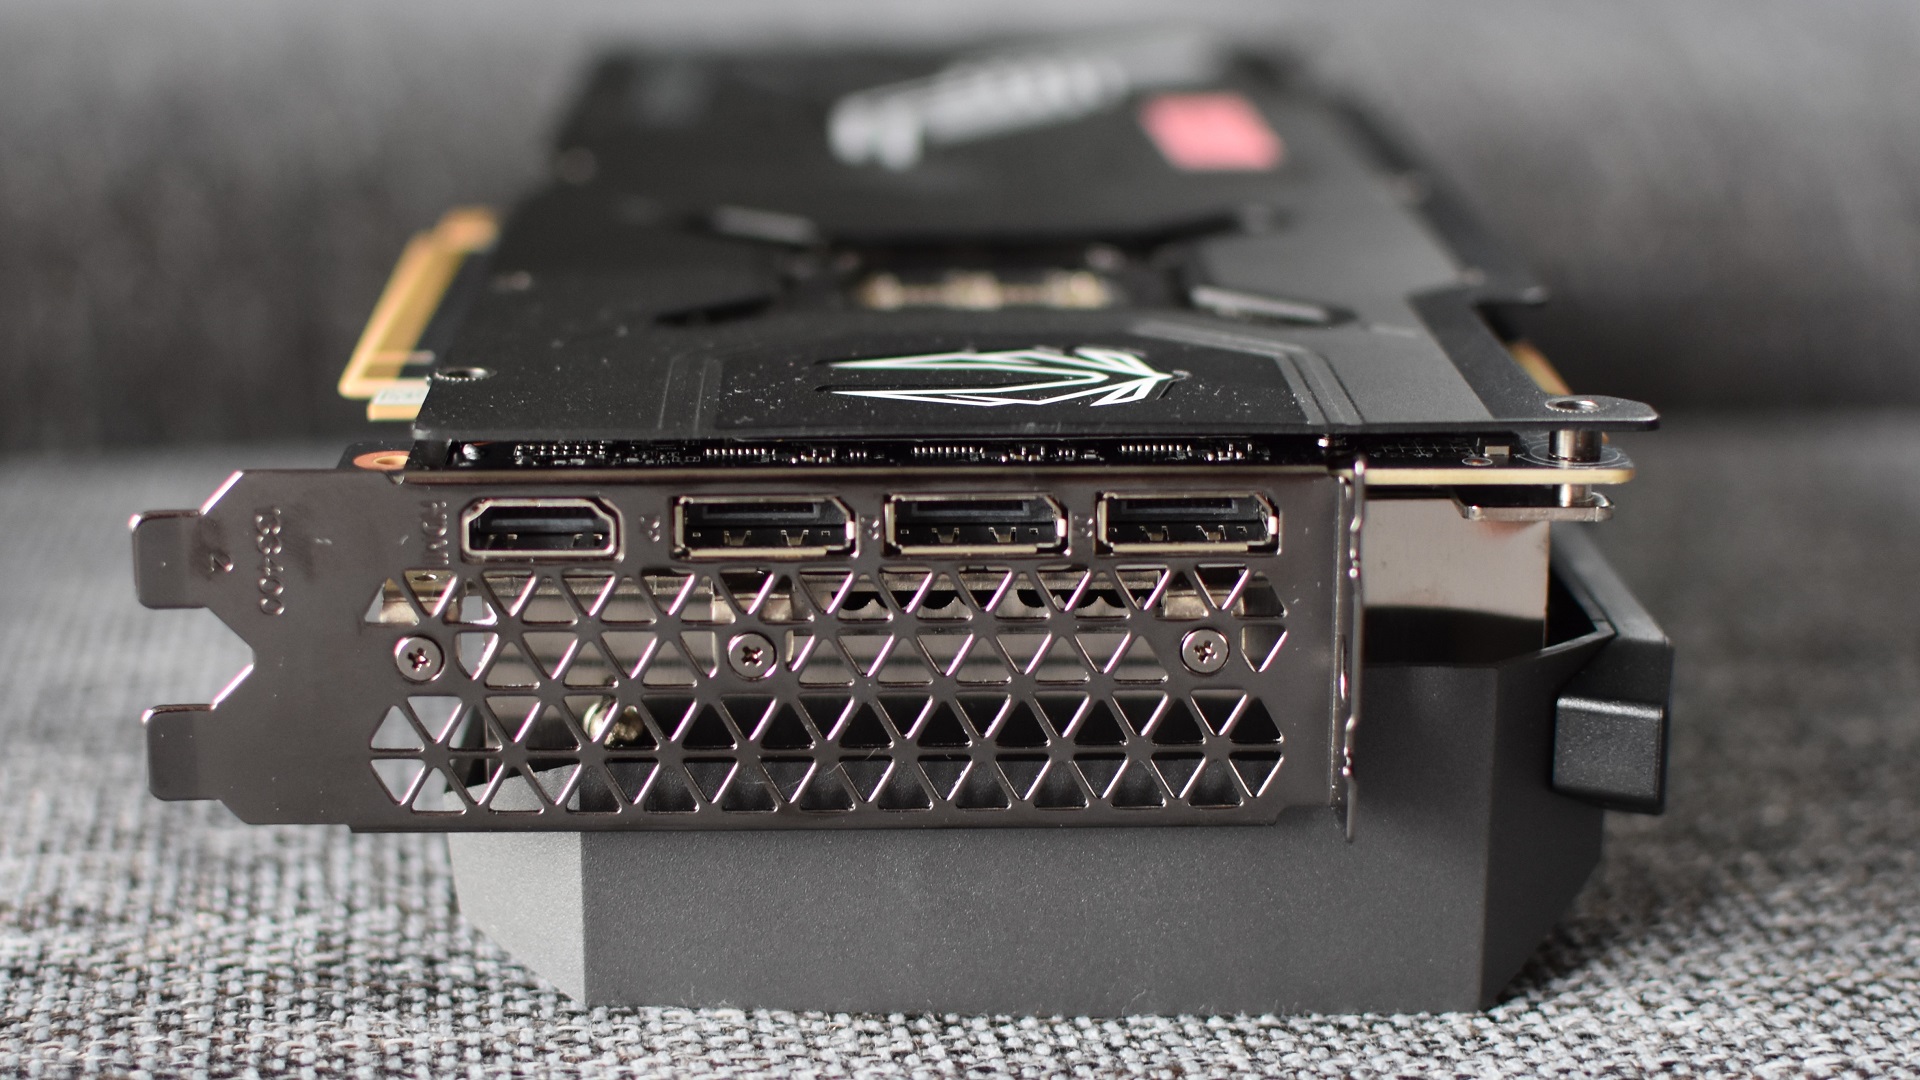 The rear ports on the Zotac GeForce RTX 3090 Ti AMP Extreme Holo graphics card.